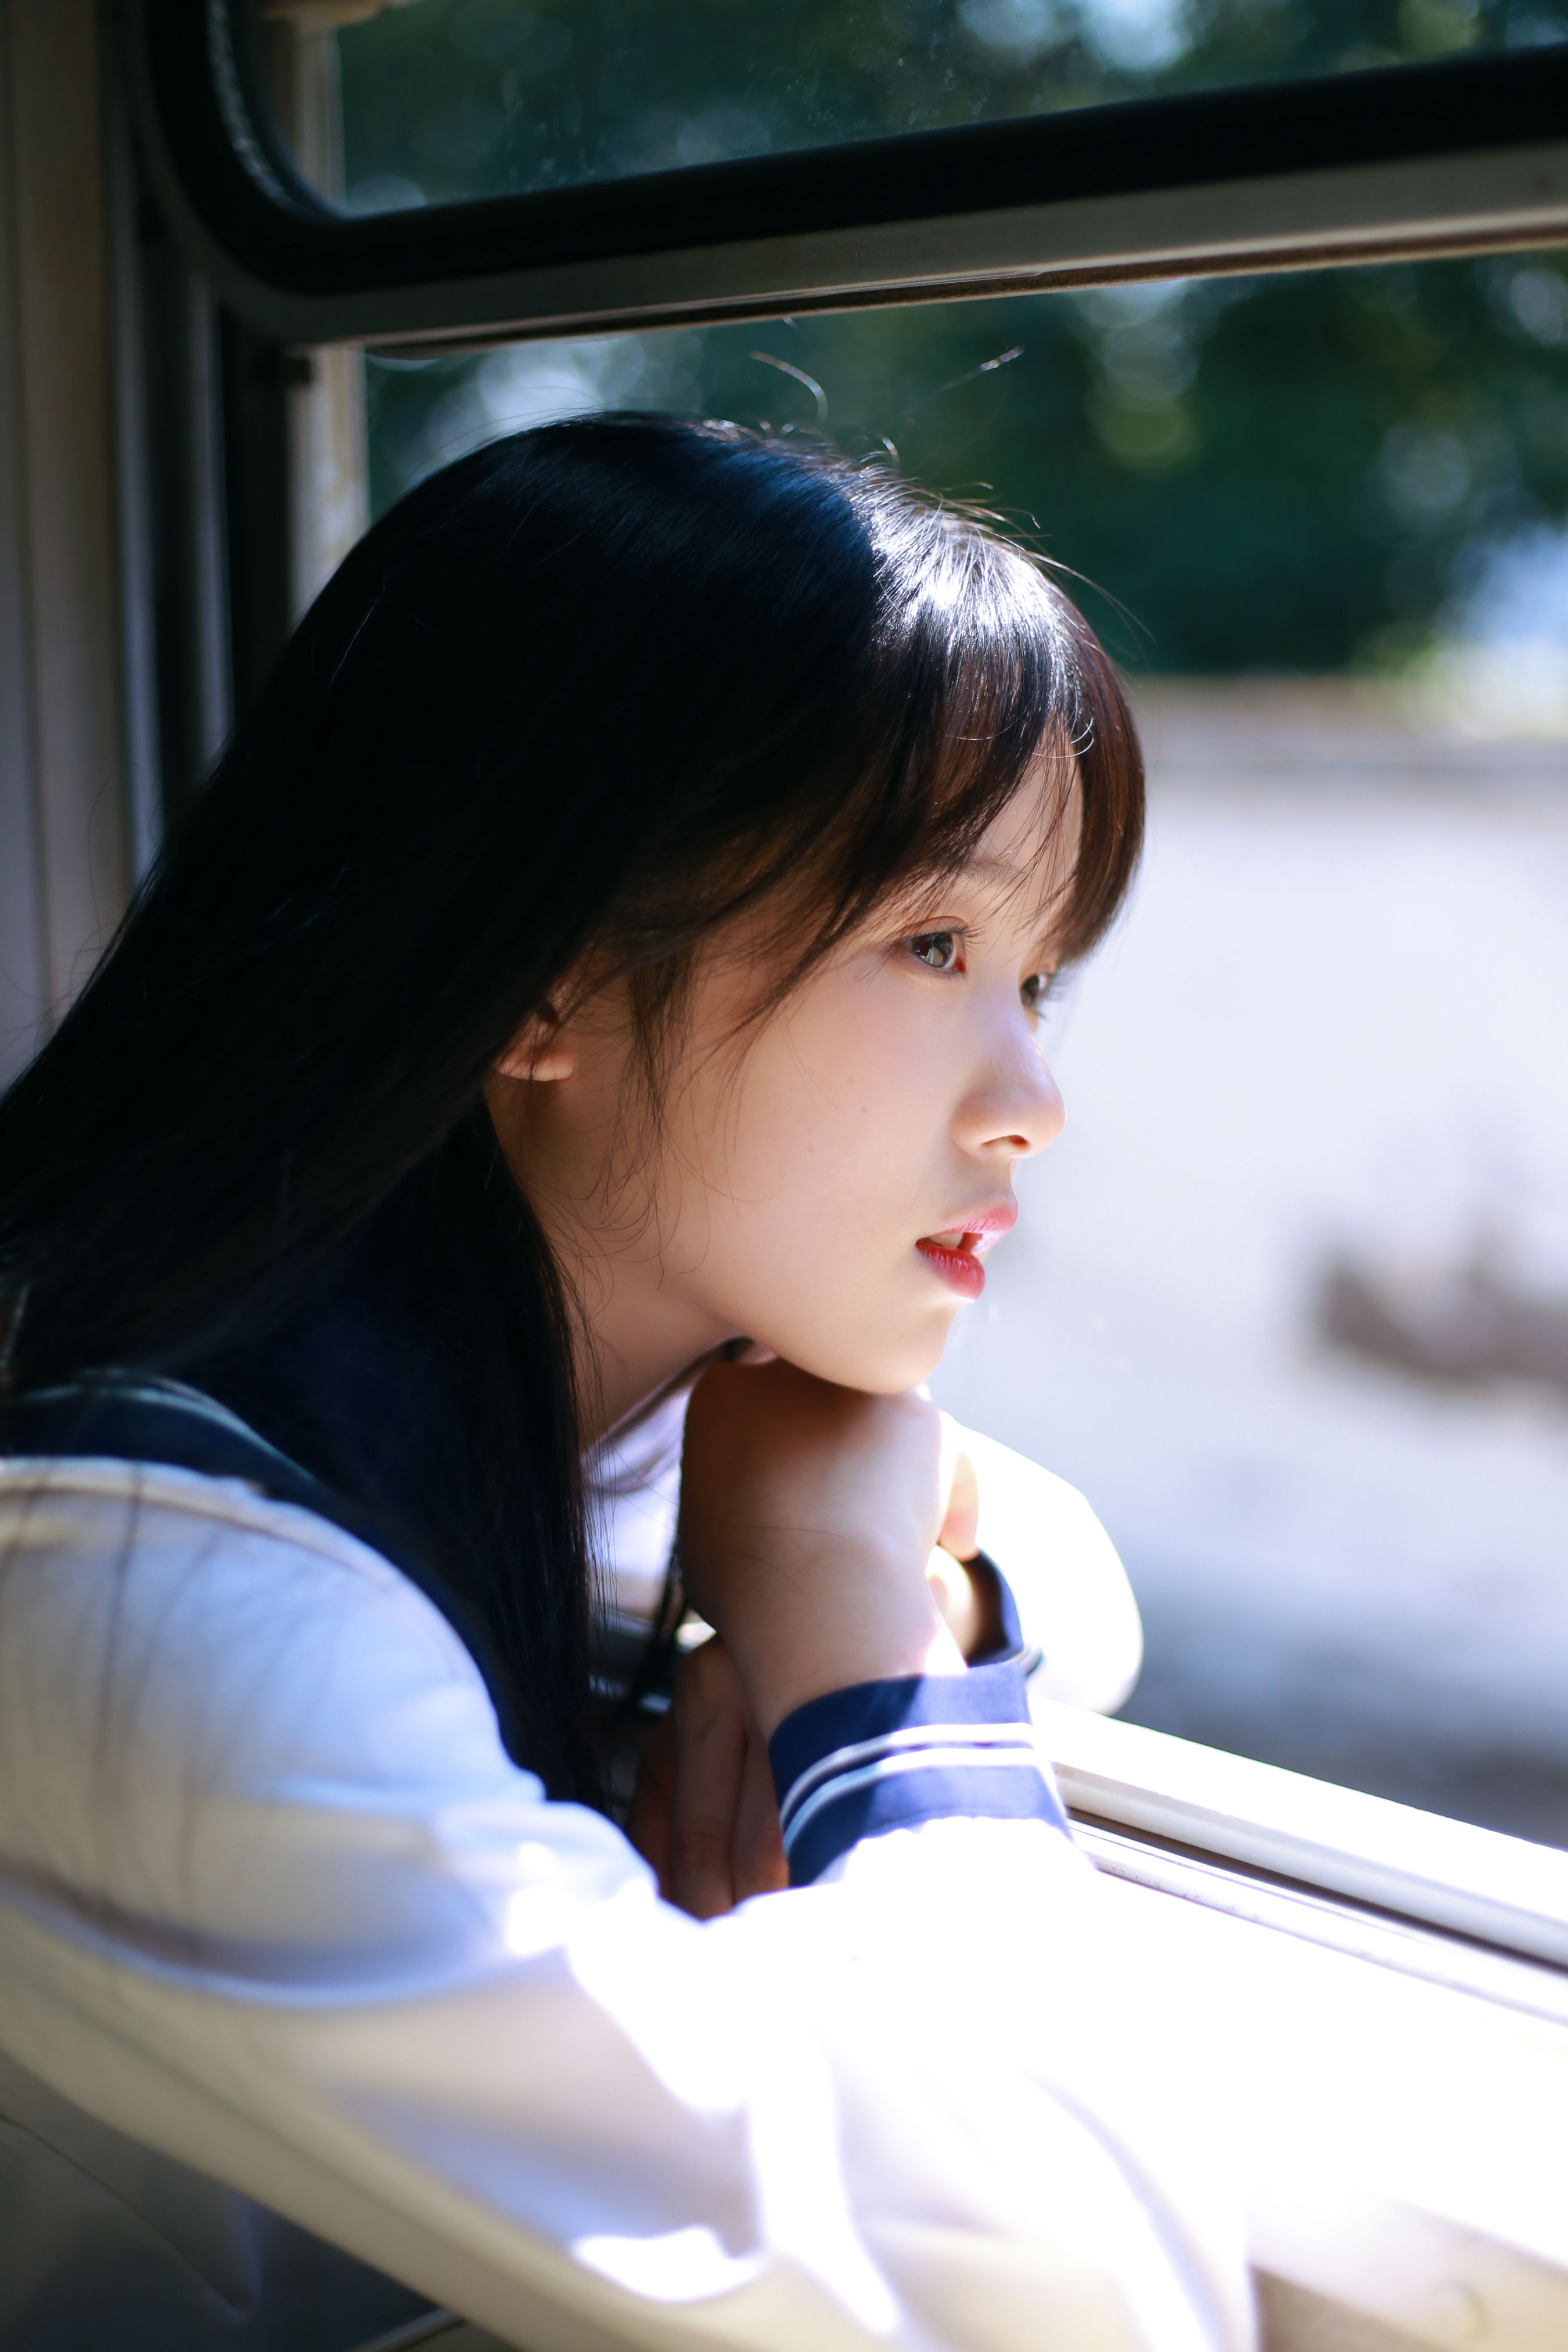 Asian Women Vehicle Looking Out Window Dark Hair Face Profile Parted Lips Urban Dark Eyes Model 2700x4050